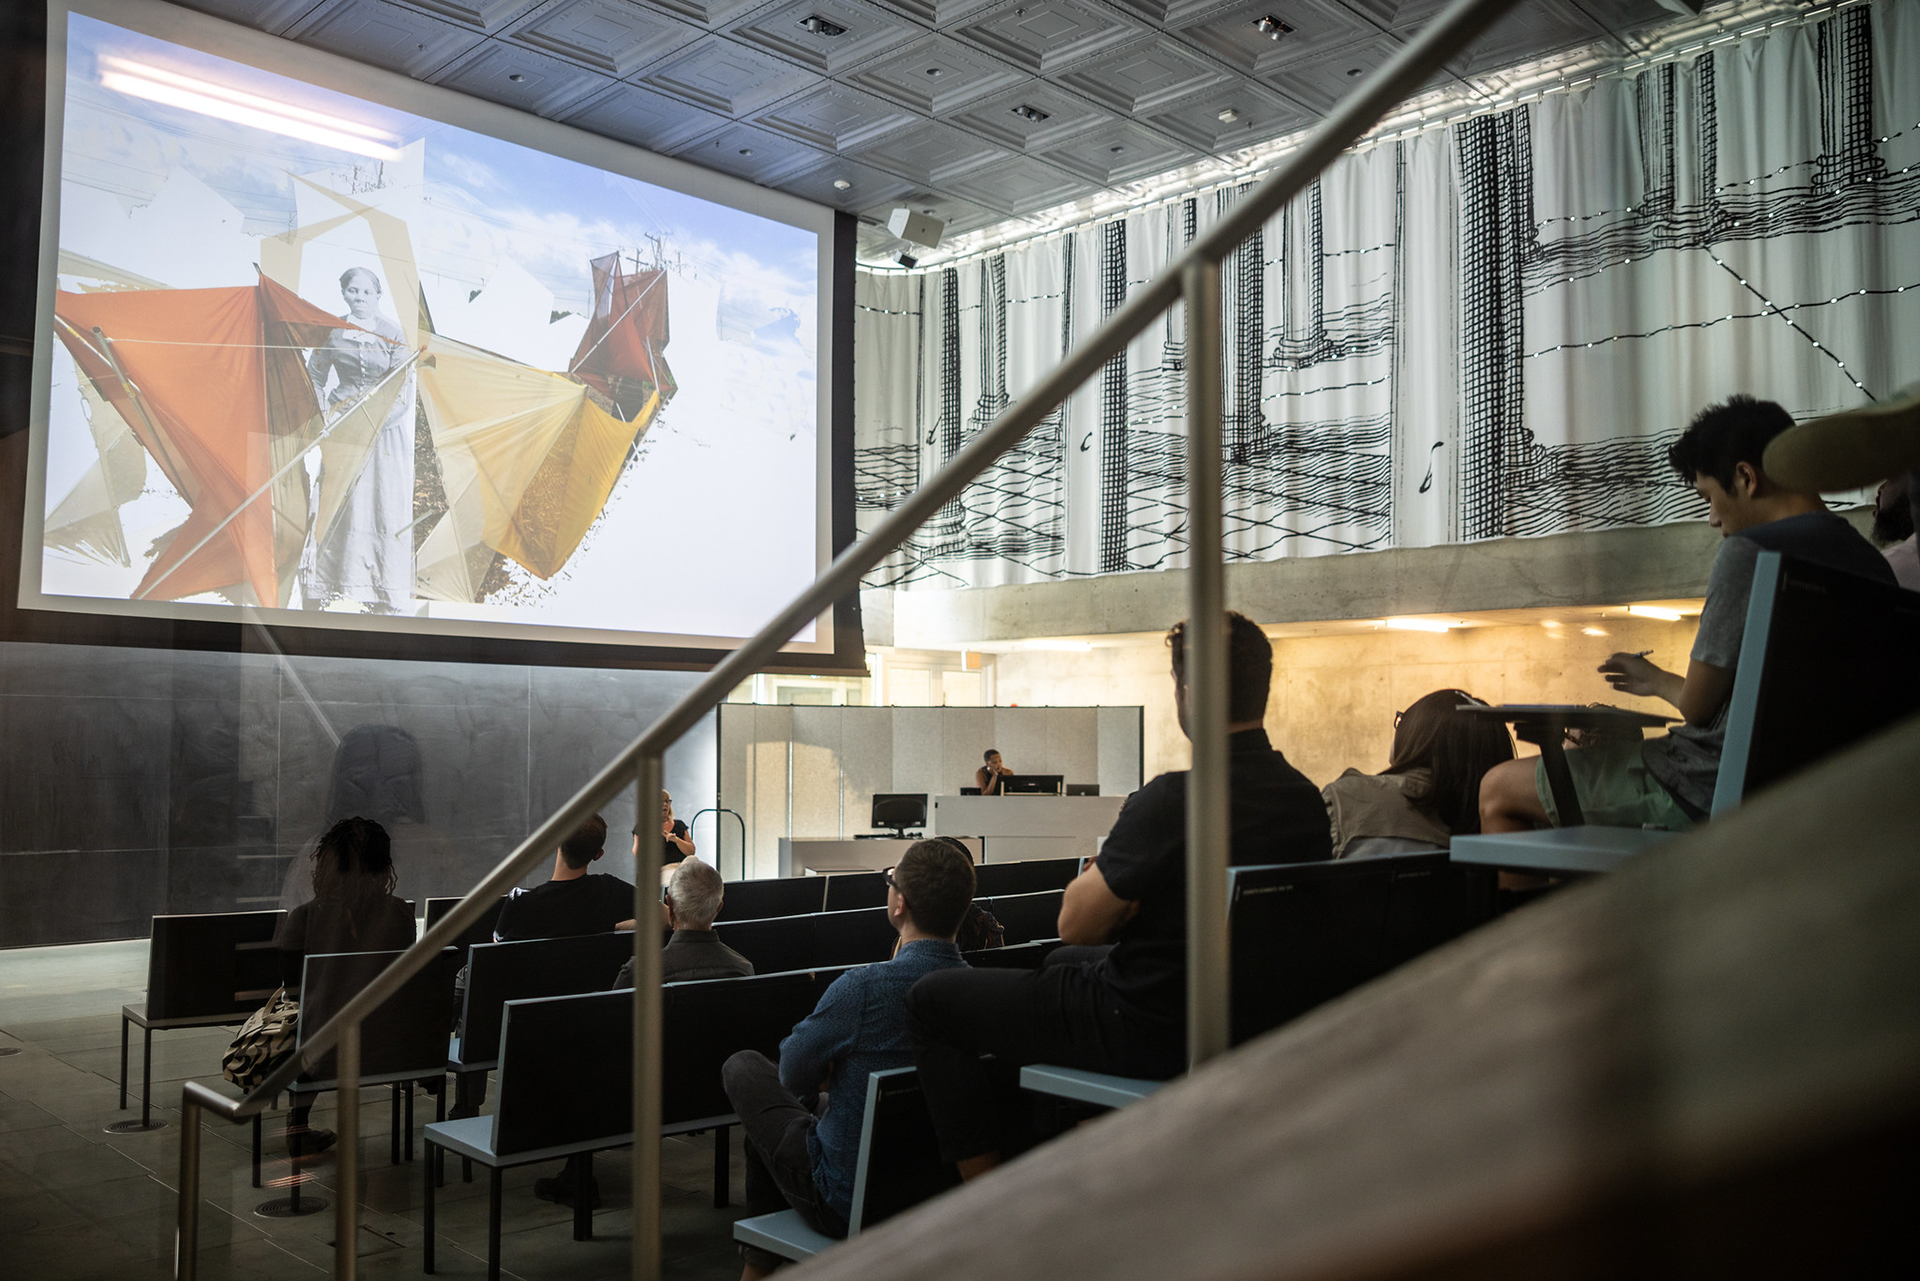 Attendees gathered in a lecture hall listening to a talk while viewing a large projection on a screen